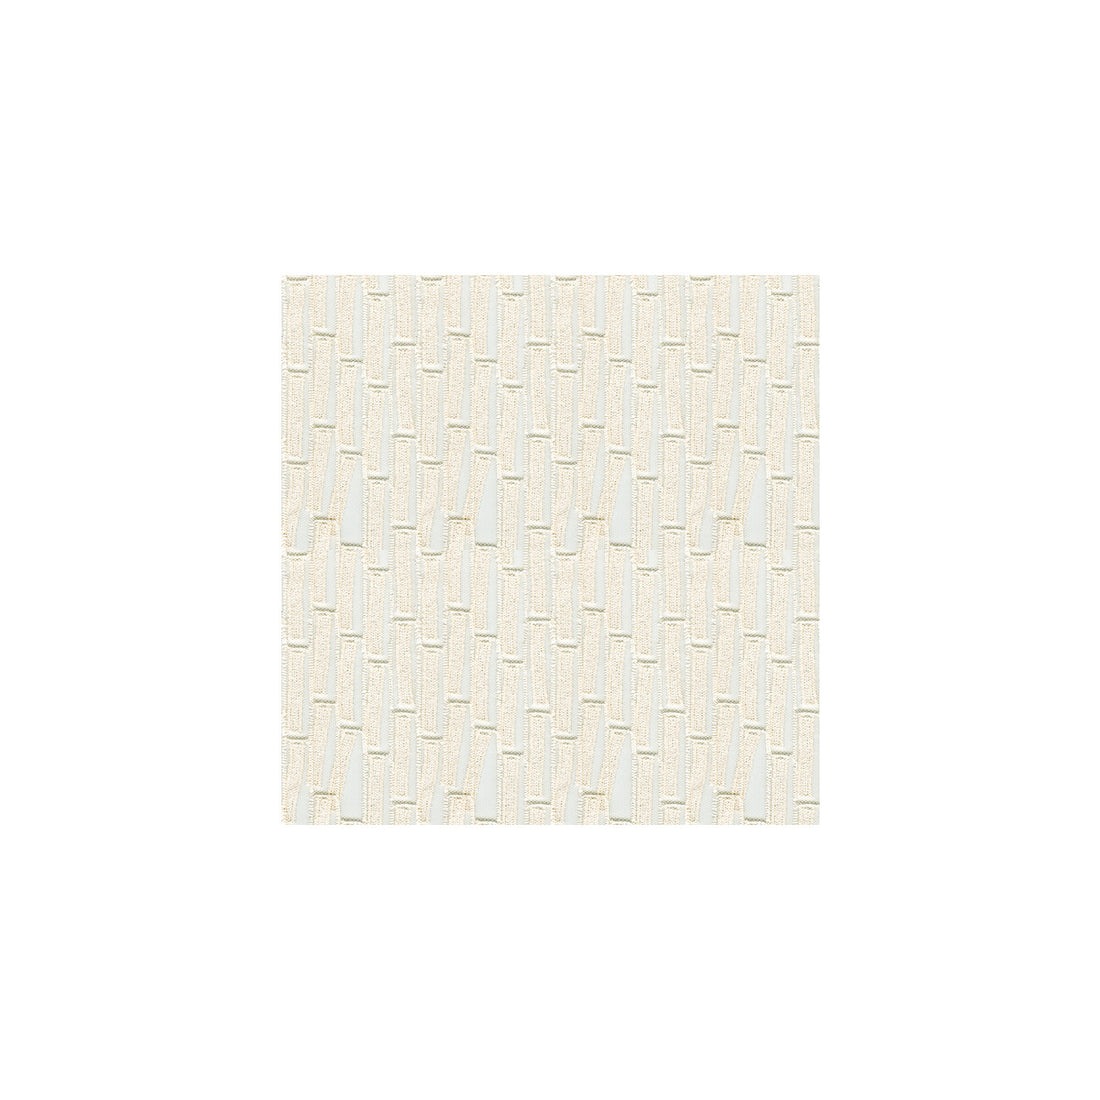 Hanging On fabric in champagne color - pattern 9993.16.0 - by Kravet Couture